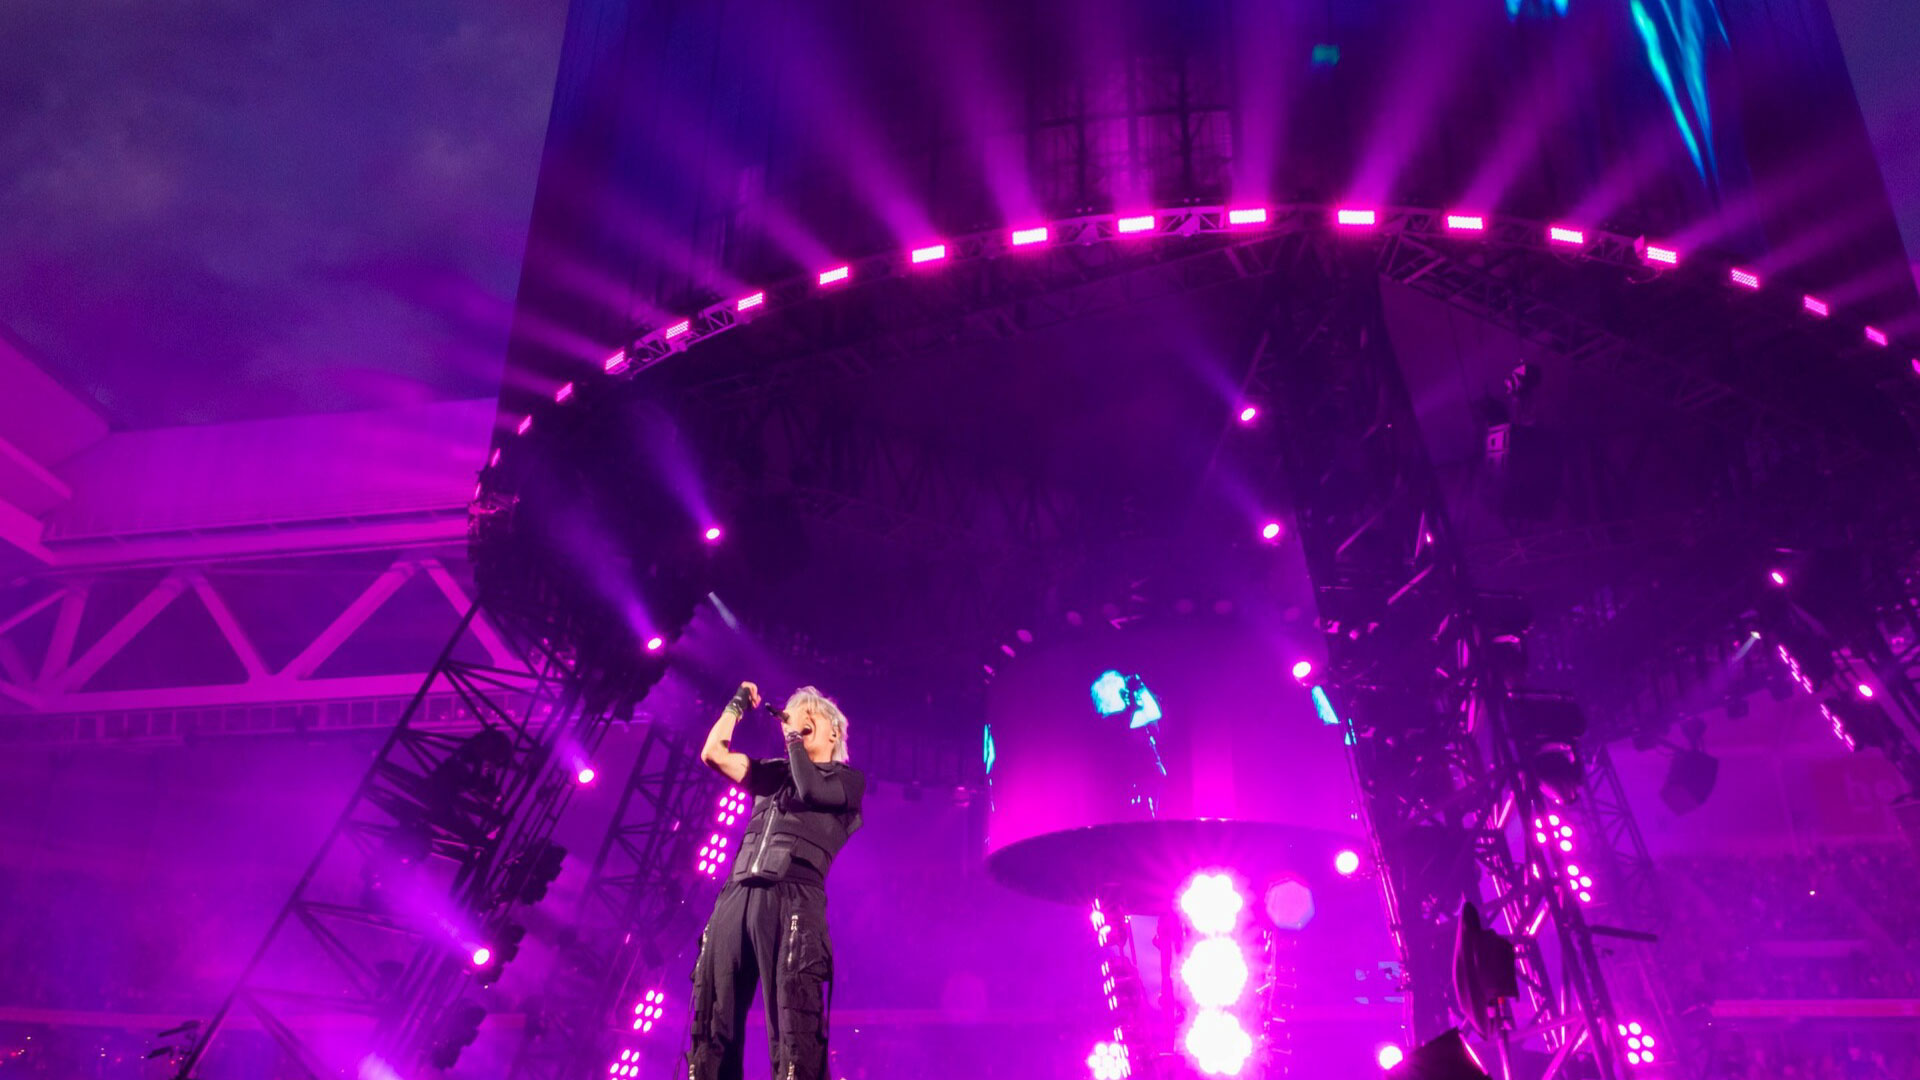 PRG France supports the Indochine Tour with the gigantic tower from the Titan X Soundblast solution! Individual solutions for every need! Feel free to contact us!